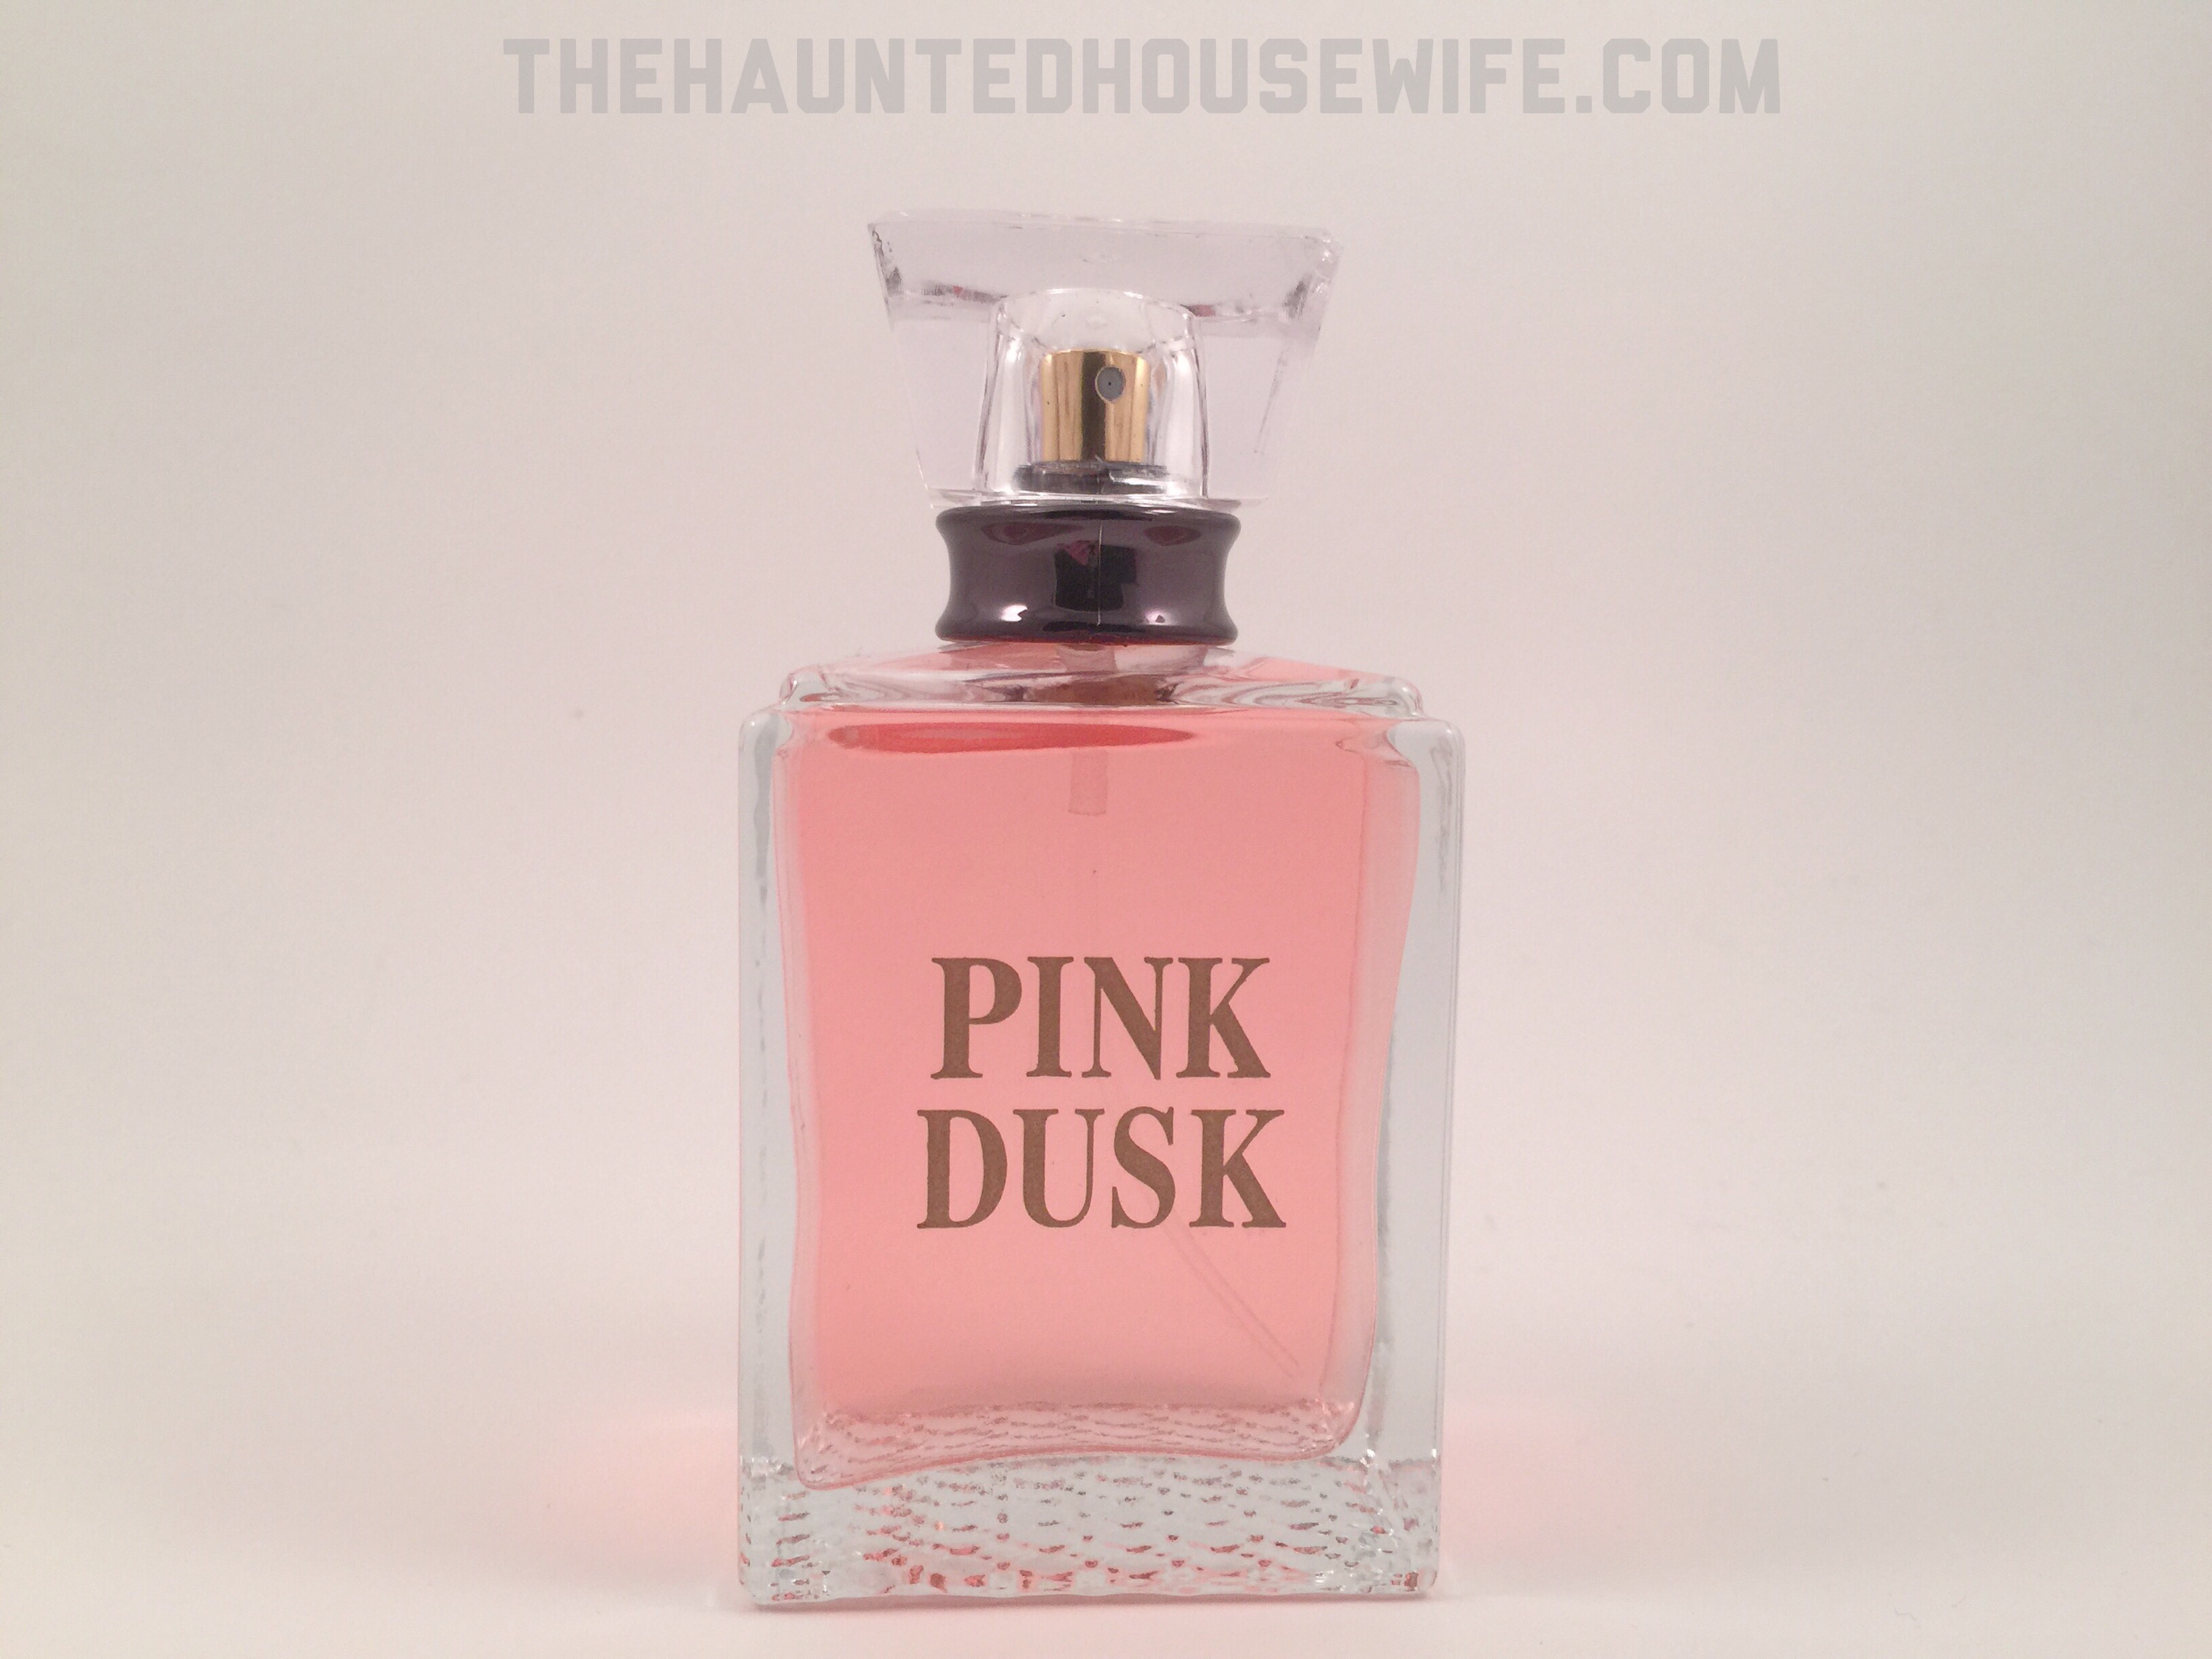 Designer Perfume Knock-Offs! » The Haunted Housewife